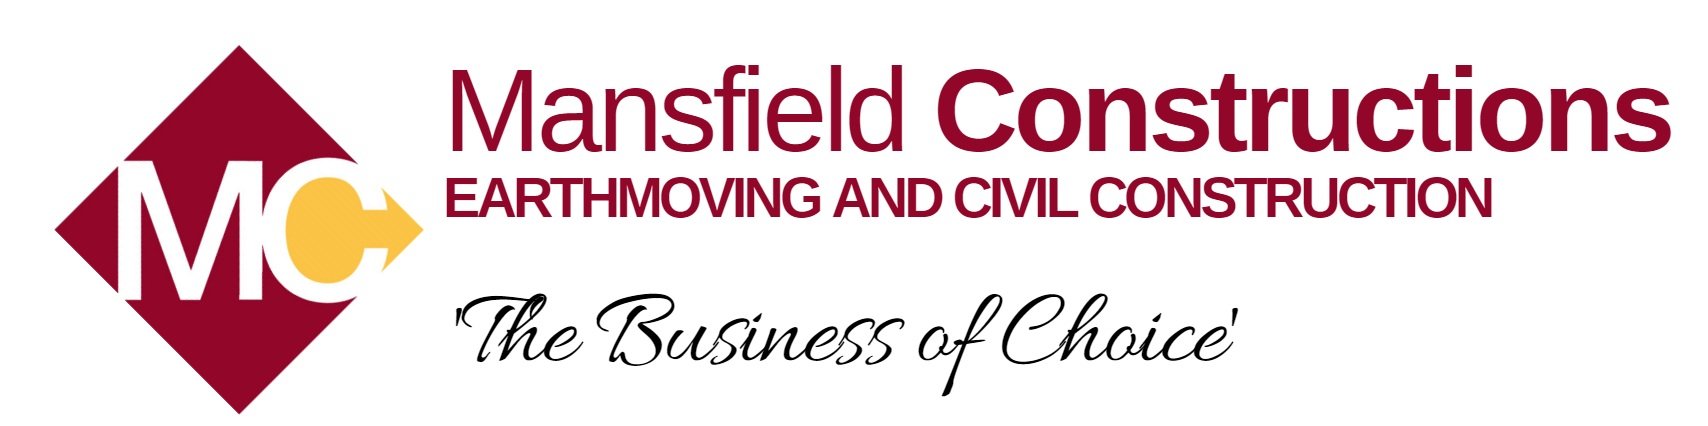 Mansfield Constructions